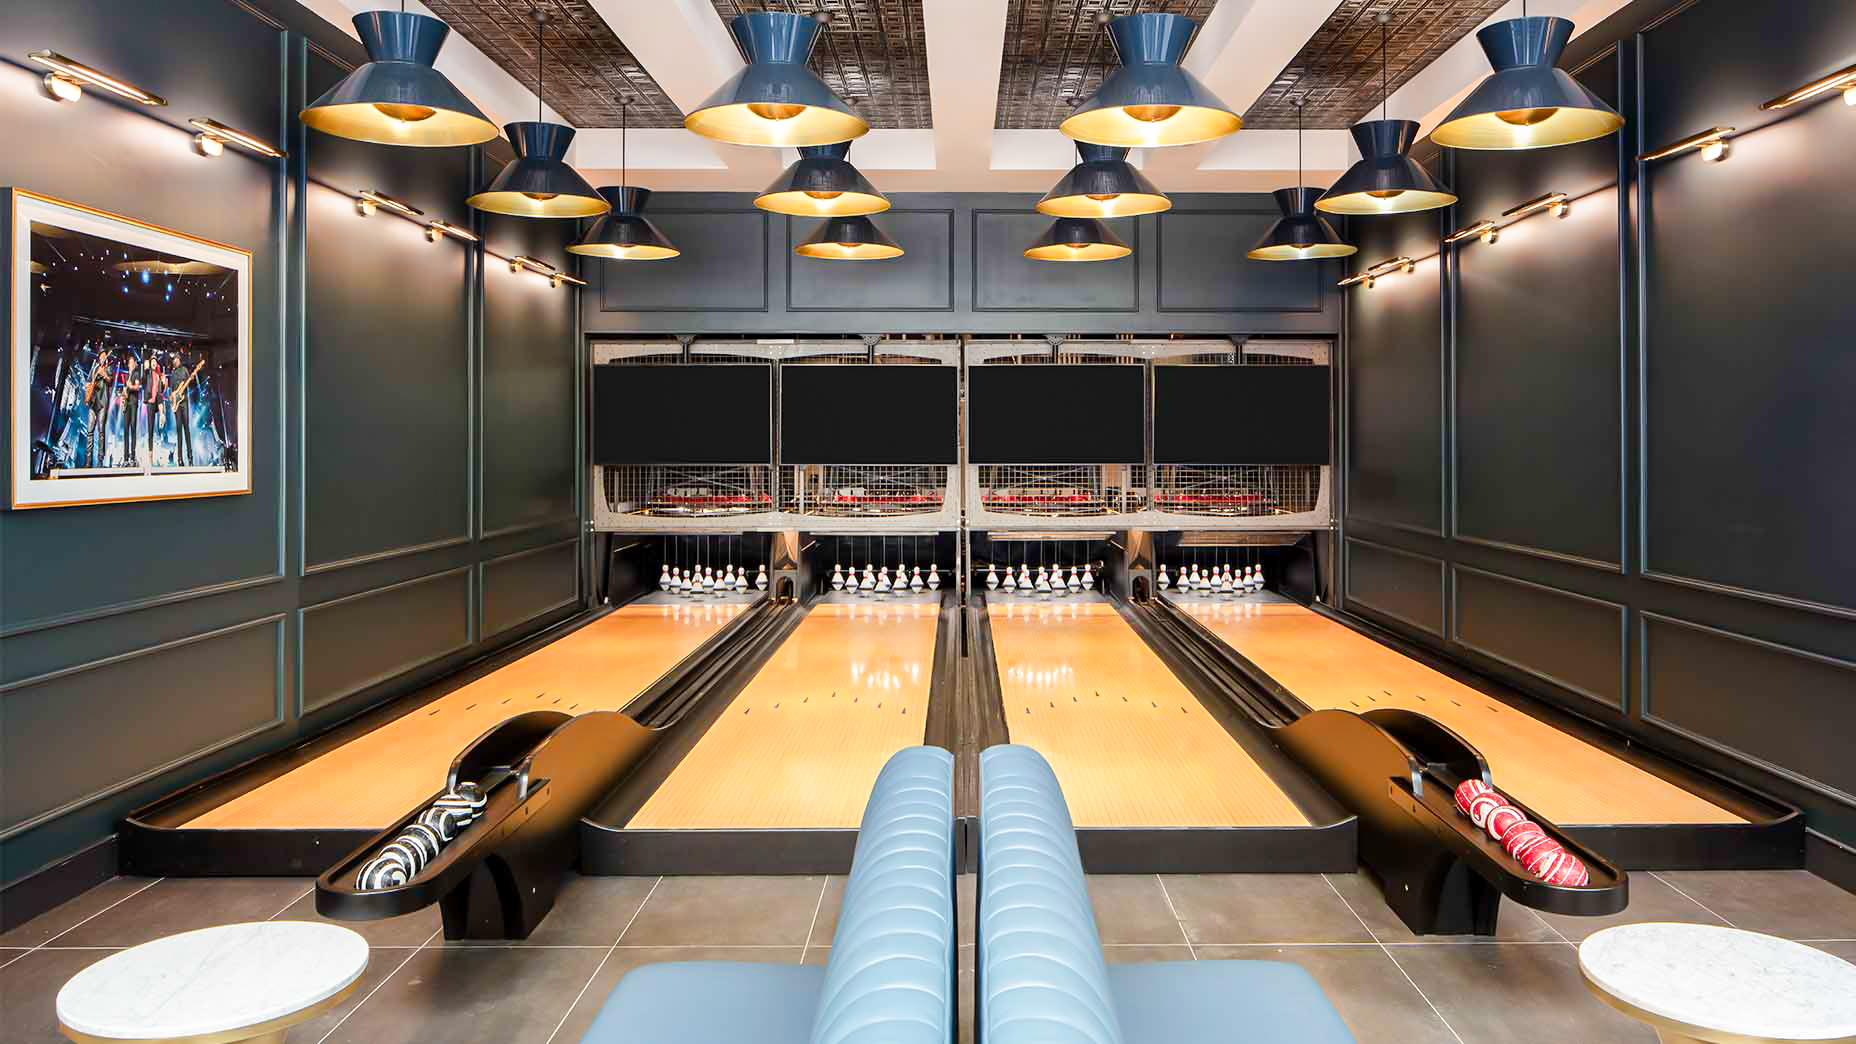 Leagues  Wainwright Bowling Centre & Dog 'N Suds Sports Lounge